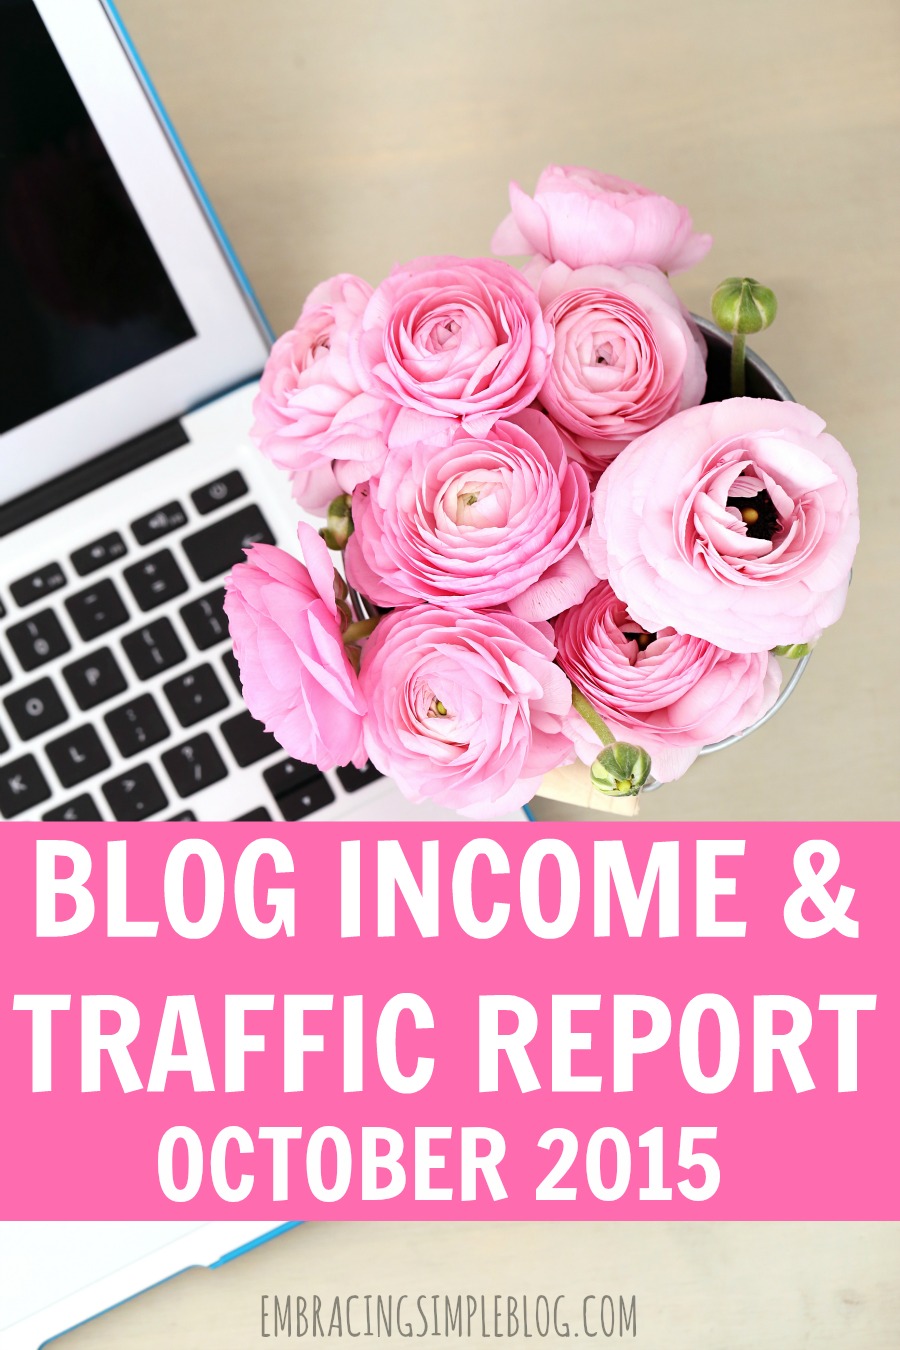 Want to know how I made $1,500 from blogging last month as a stay-at-home Mom? I'm sharing exactly how I earn an income from blogging in my October 2015 Blog Income and Traffic Report. Learn how to earn an income from the comfort of your own home while doing what you love!